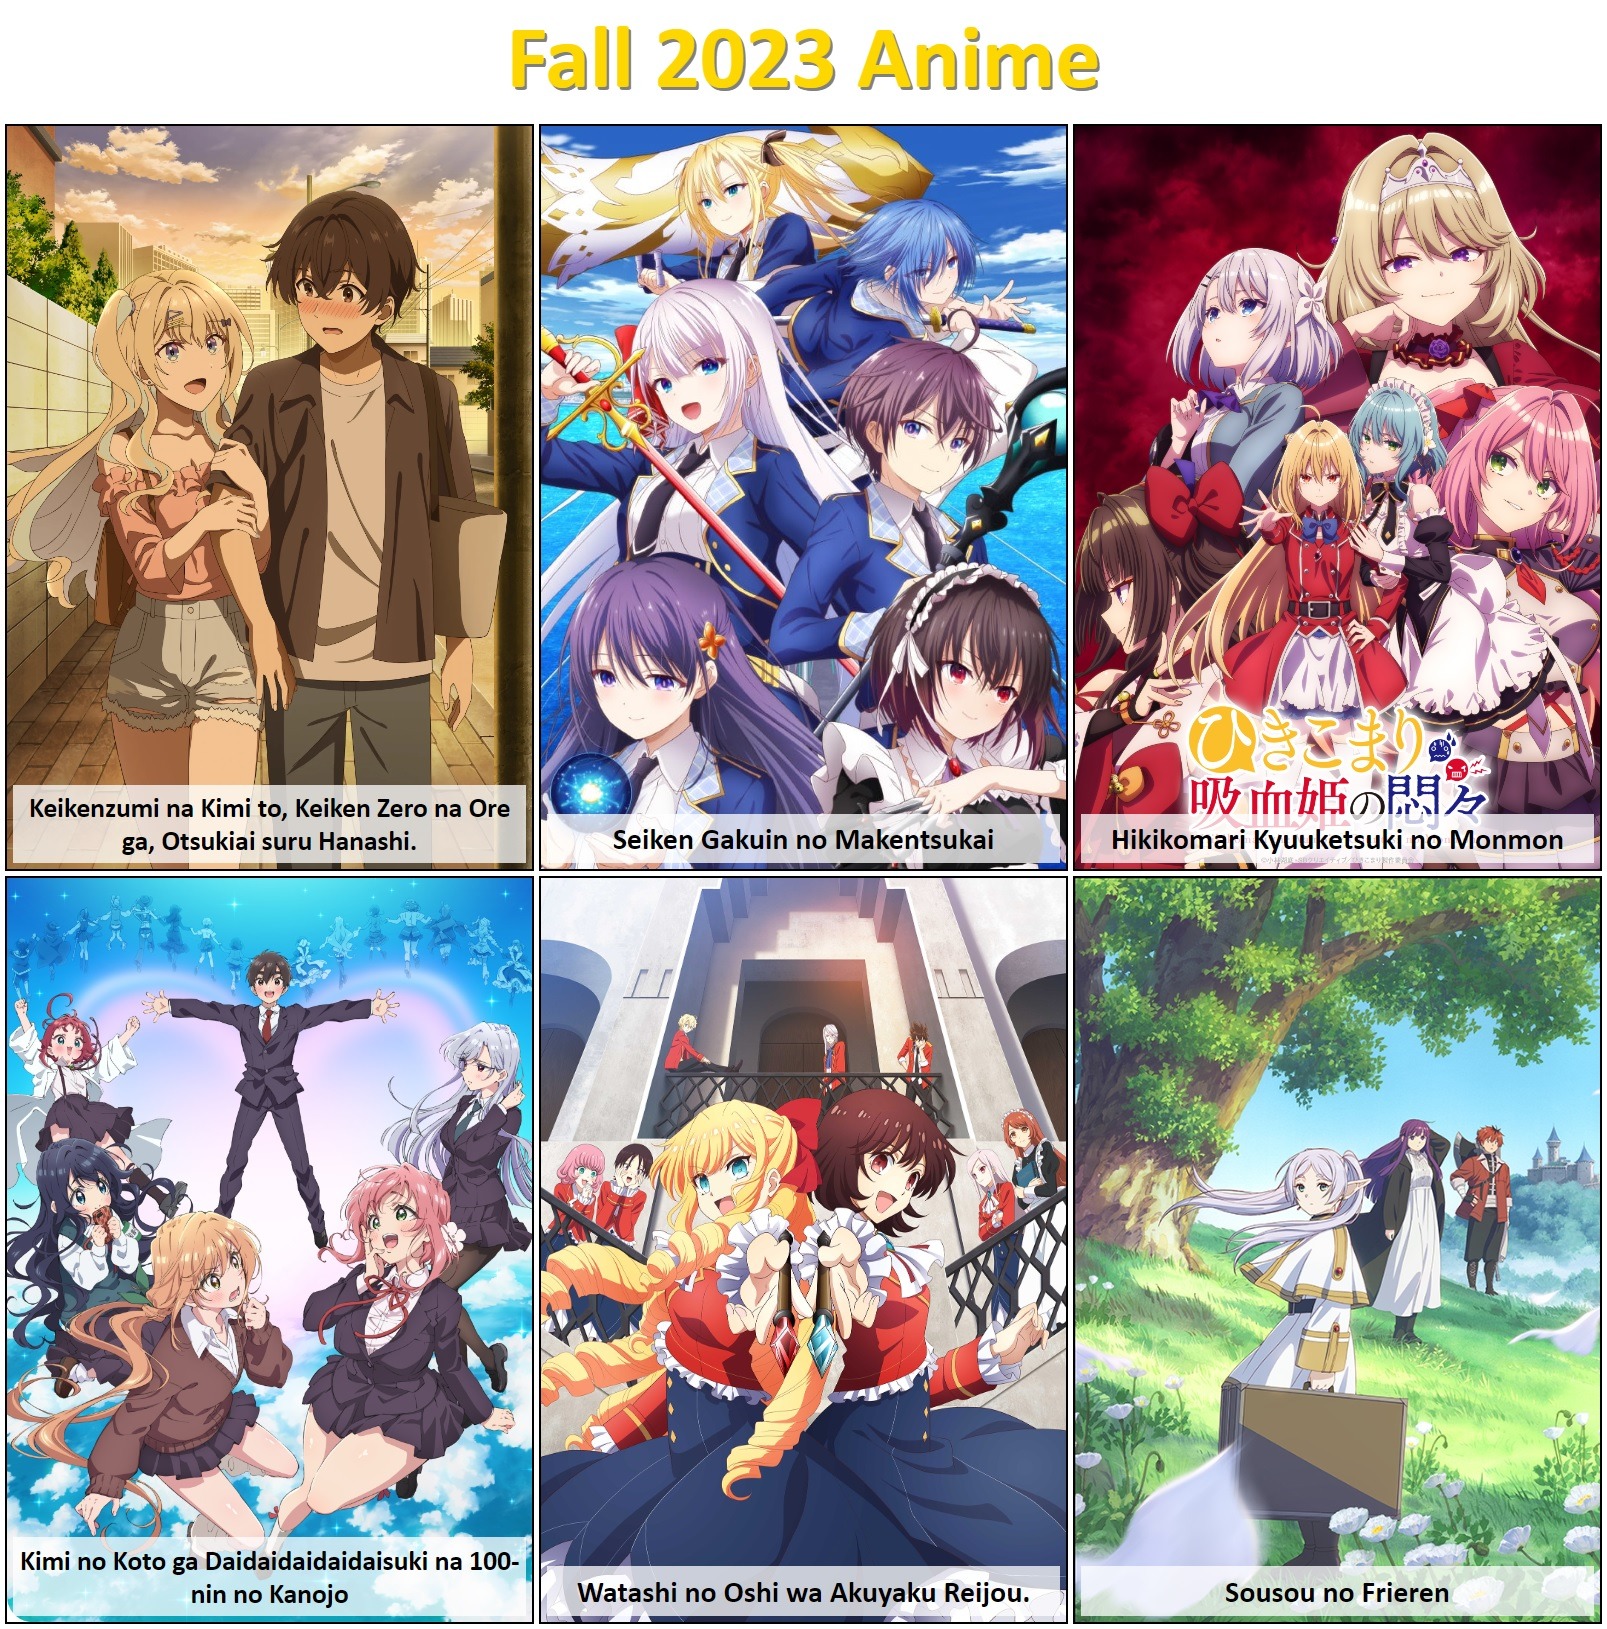 MyAnimeList.net - What's the best way to end a harem anime?